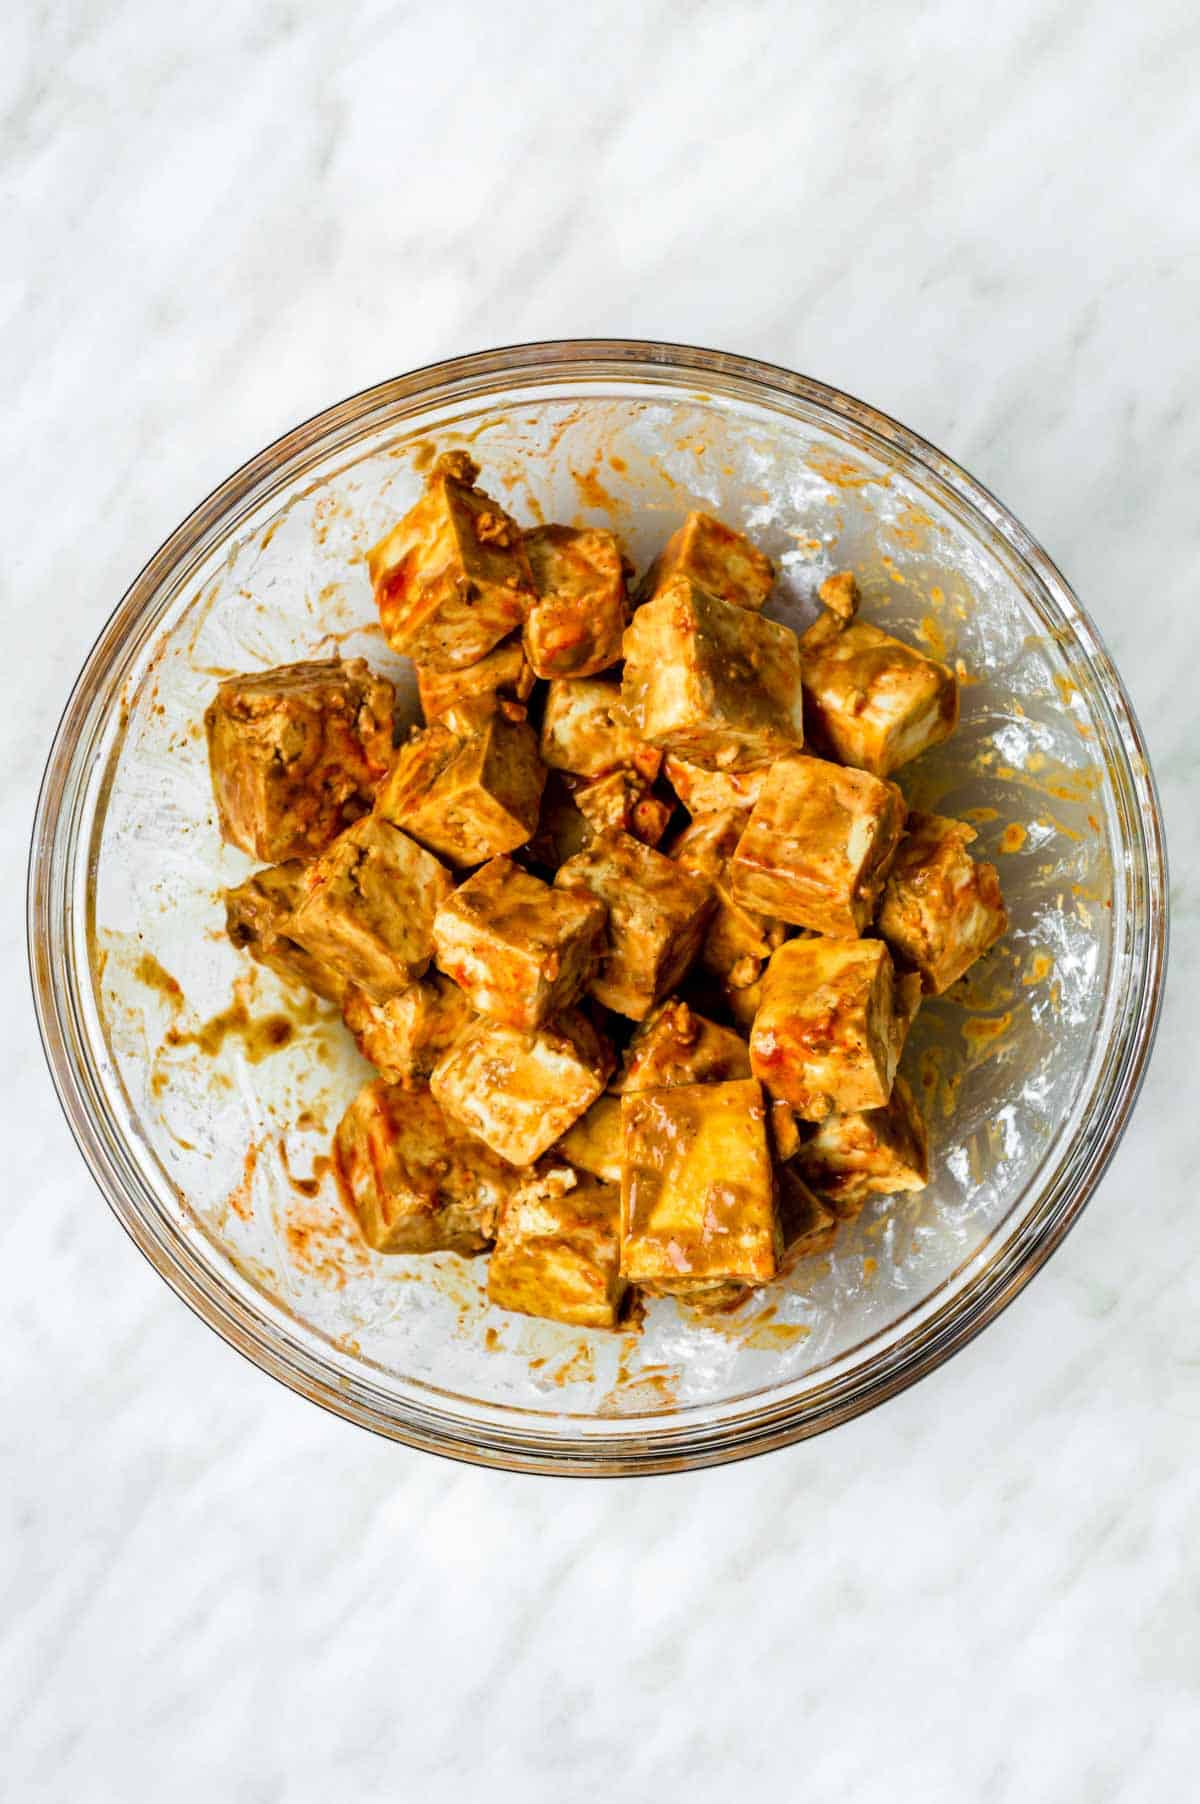 Tofu cubes coated in marinate resting in a mixing bowl.